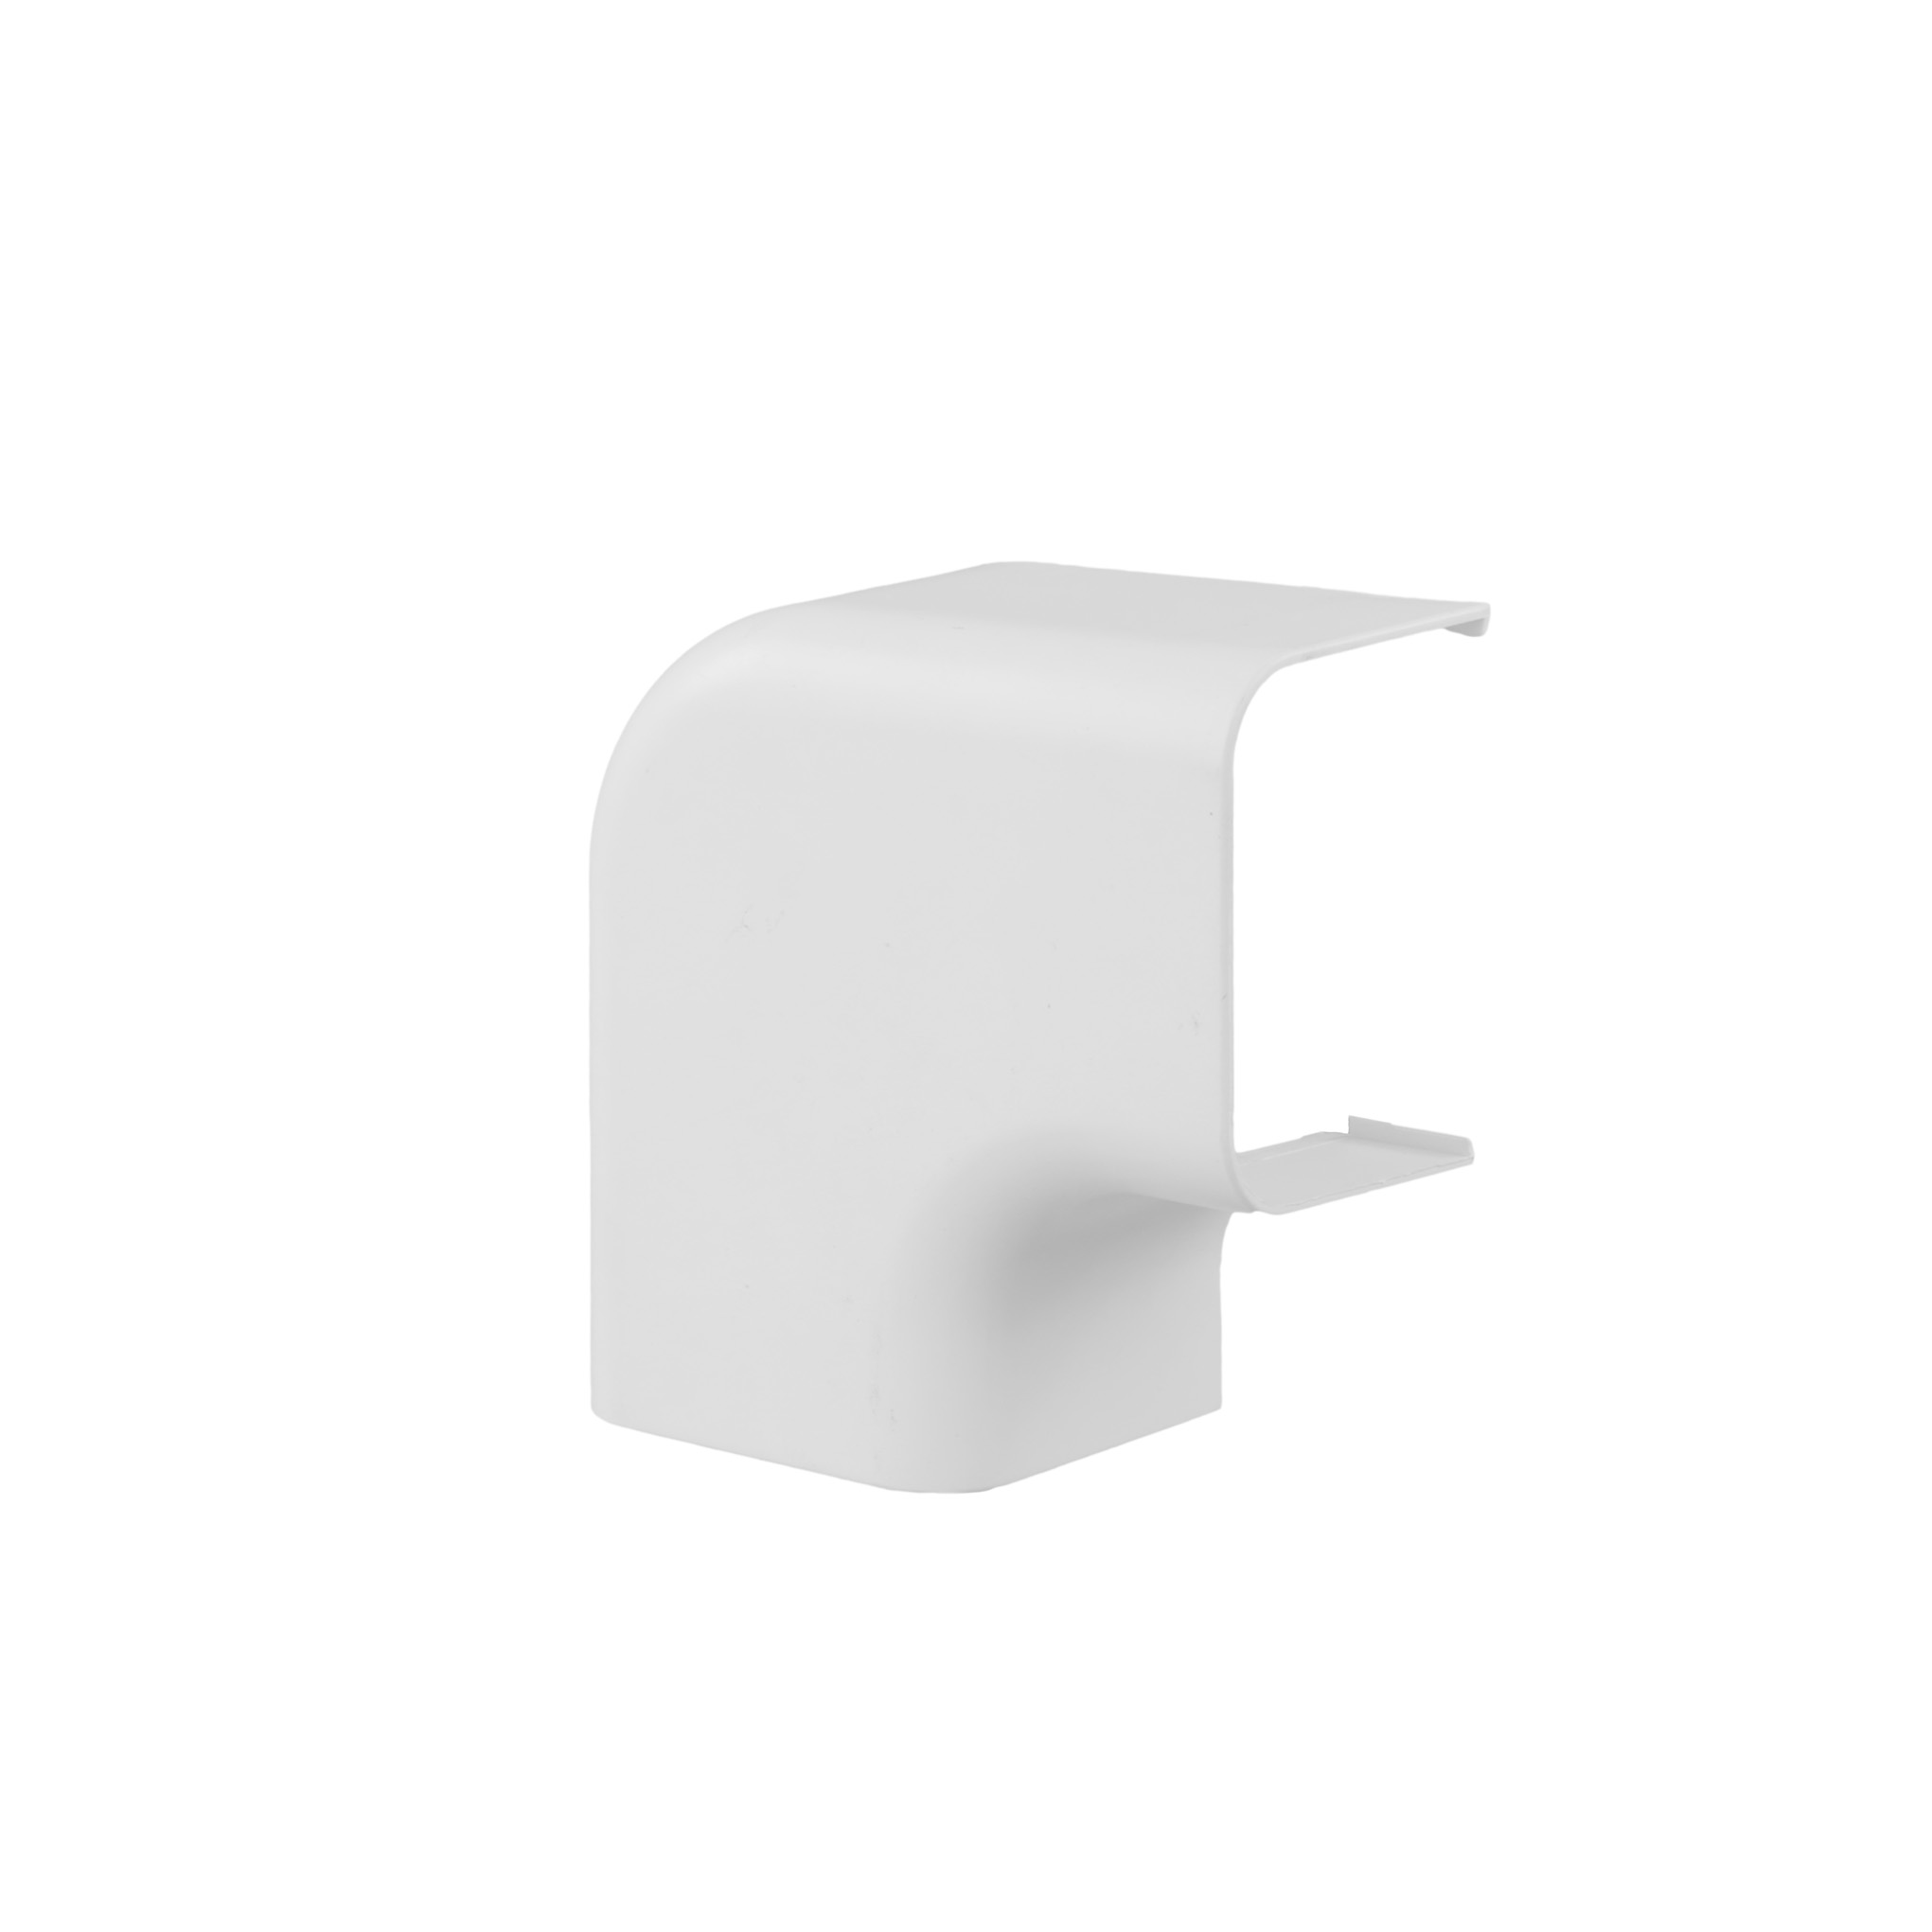 66600900 Transition elbow horizontal / vertical 80x60mm